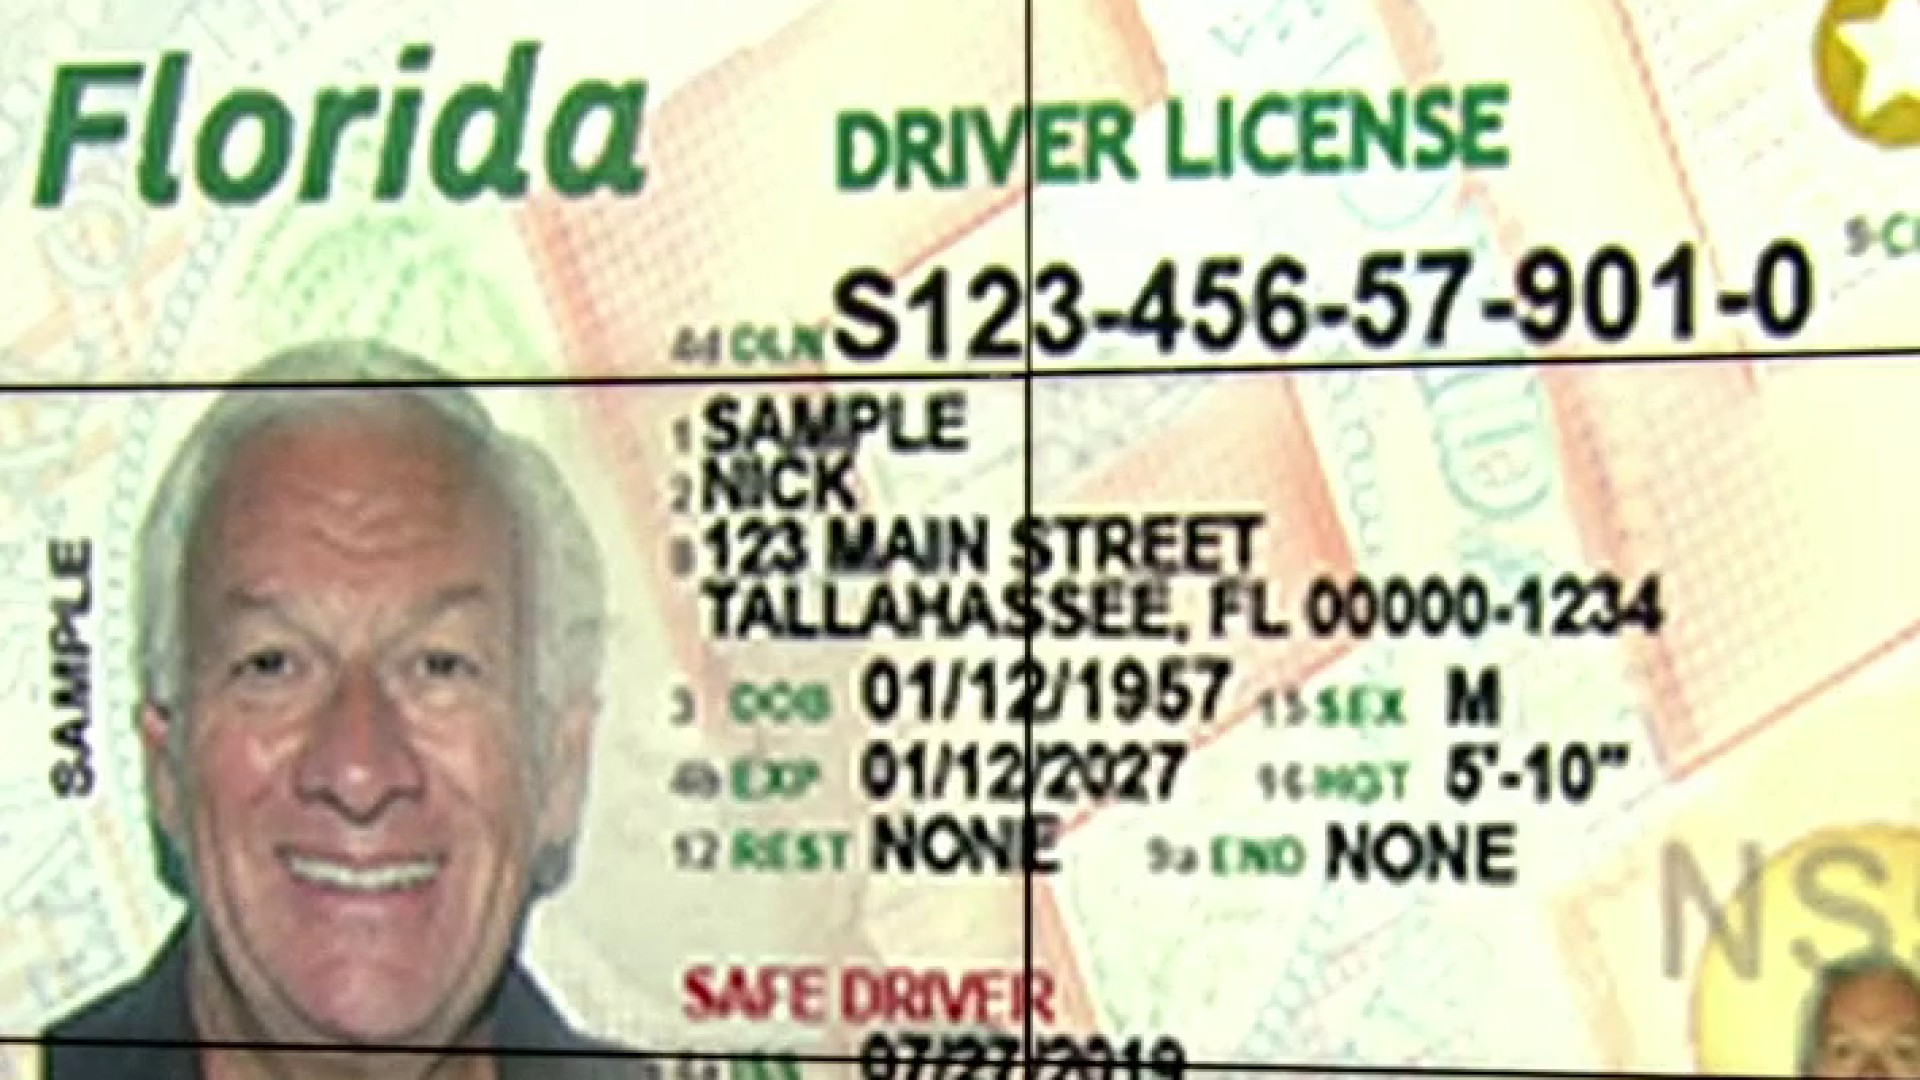 Why would a florida license say 'temporary' on it like this one